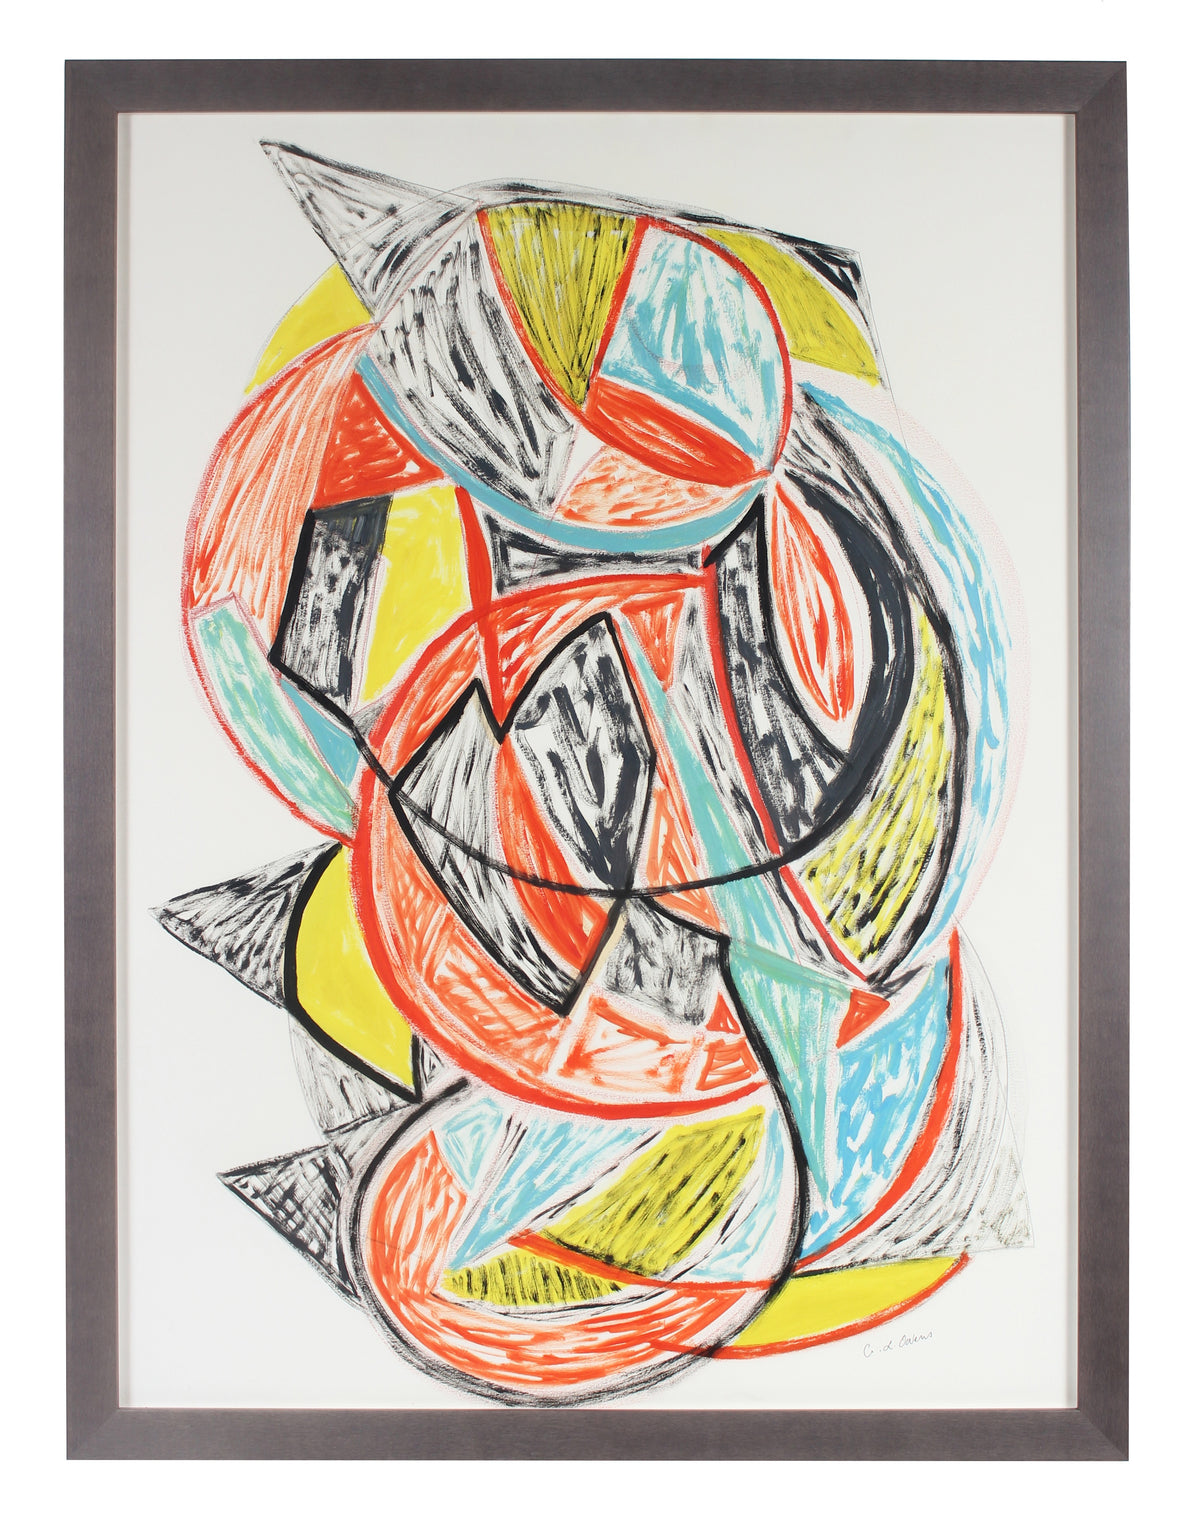 Geometric Forms in Abstraction &lt;br&gt;20th Century Mixed Media Drawing &lt;br&gt;&lt;br&gt;#93220